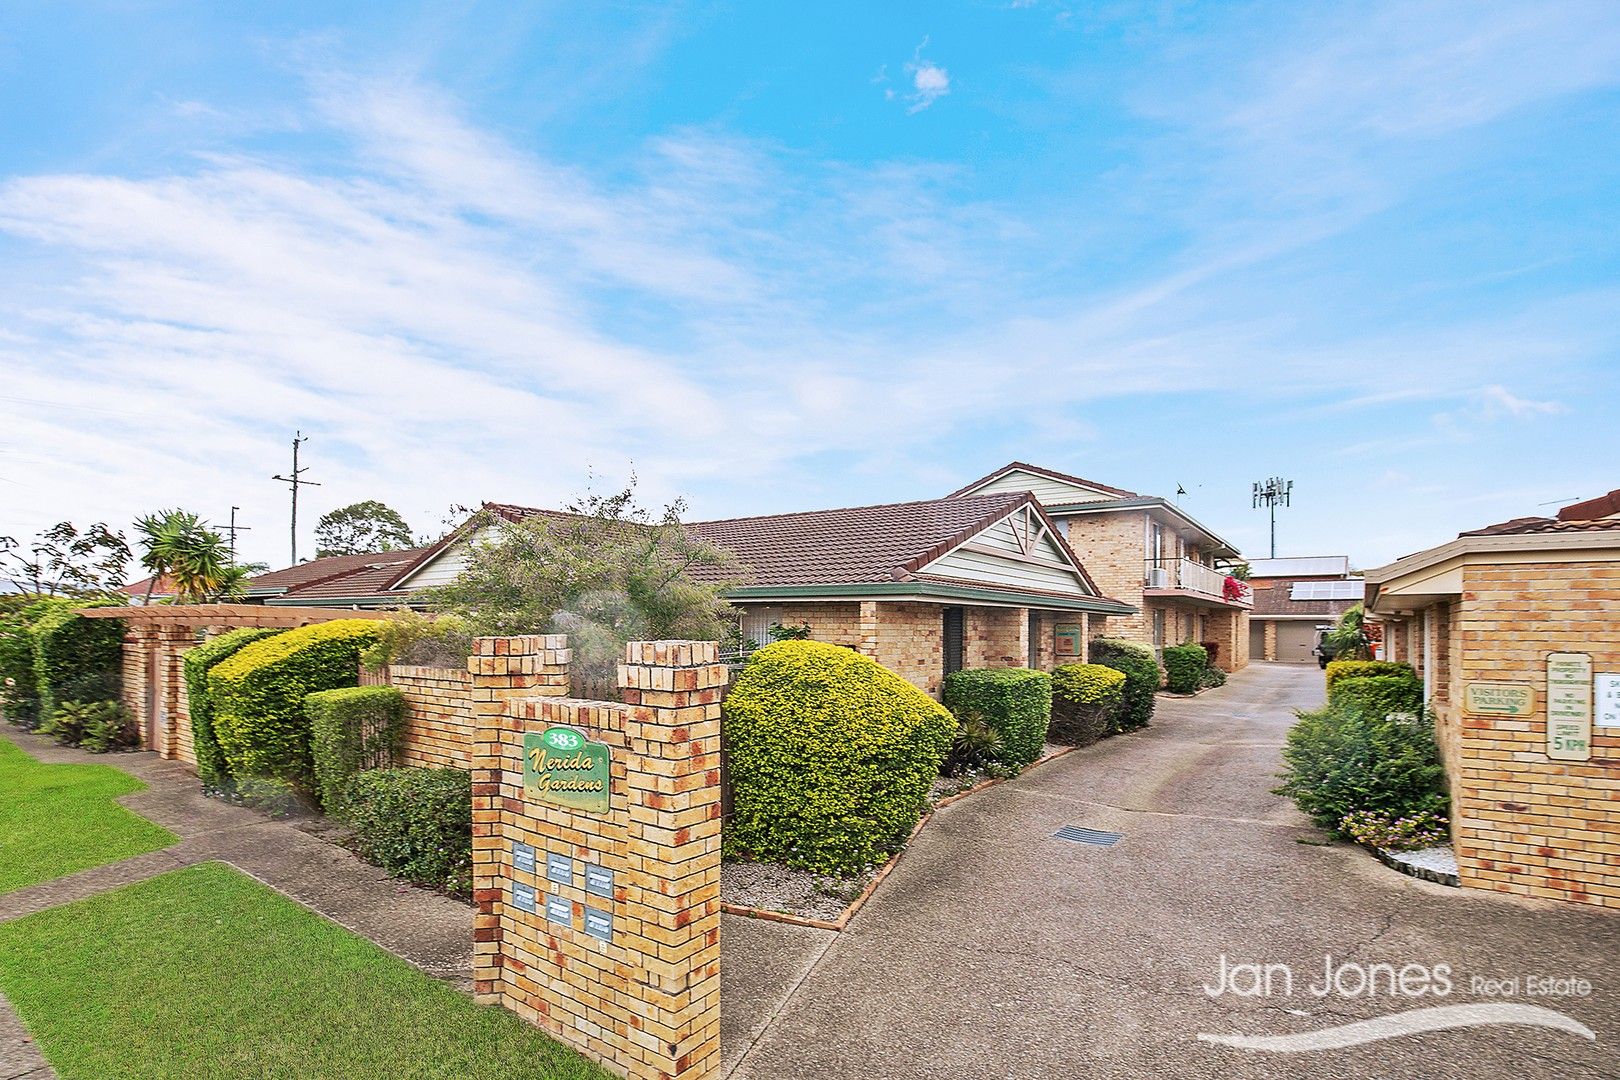 5/381/5/381 Oxley Ave, Margate QLD 4019, Image 0